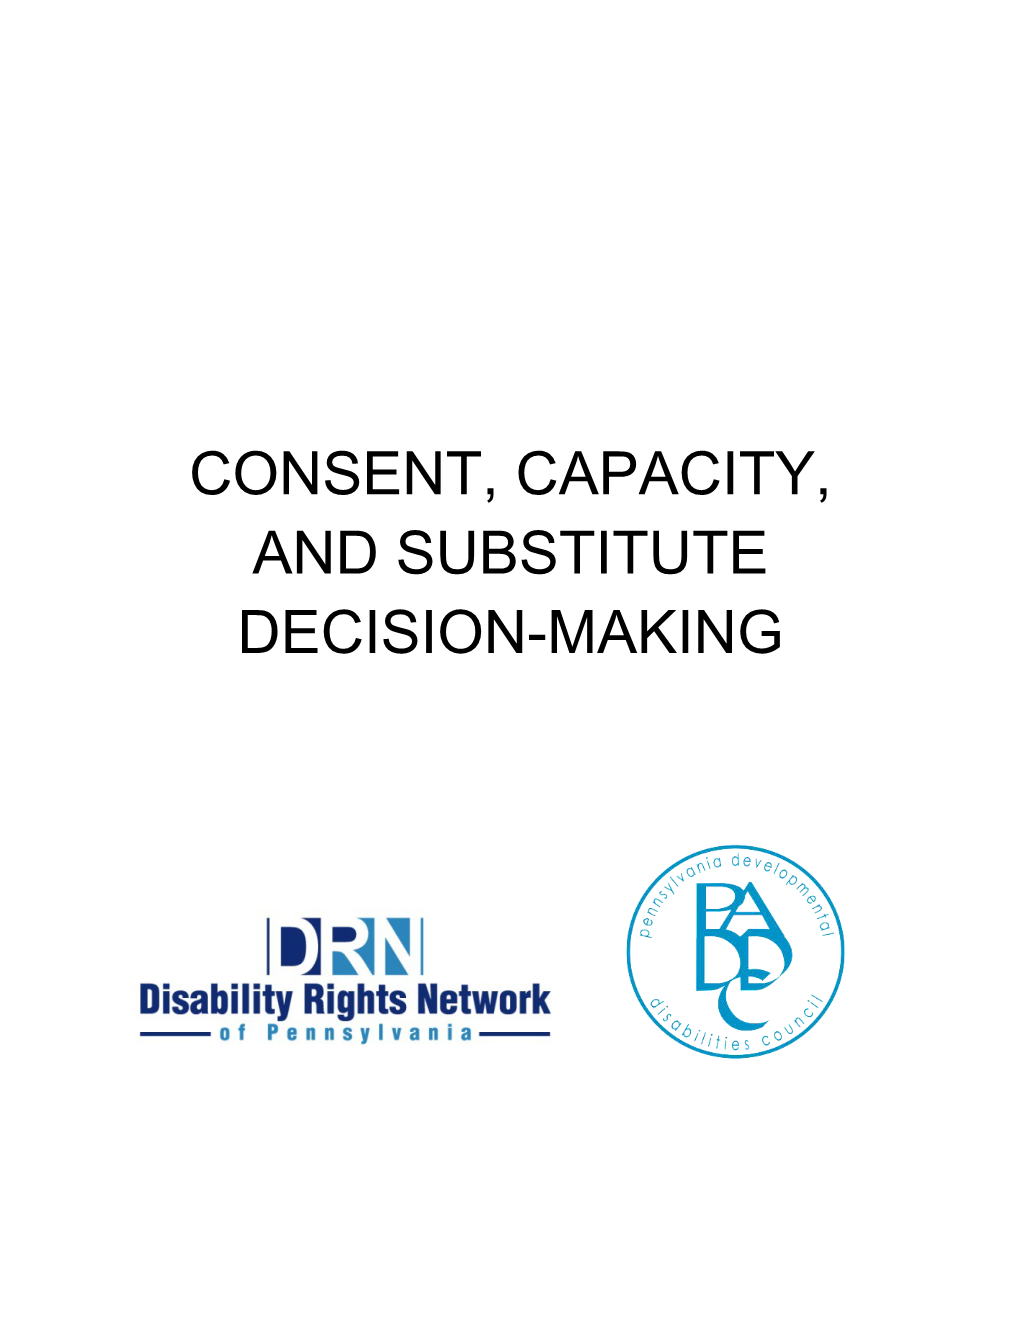 Consent, Capacity, and Substitute Decision-Making